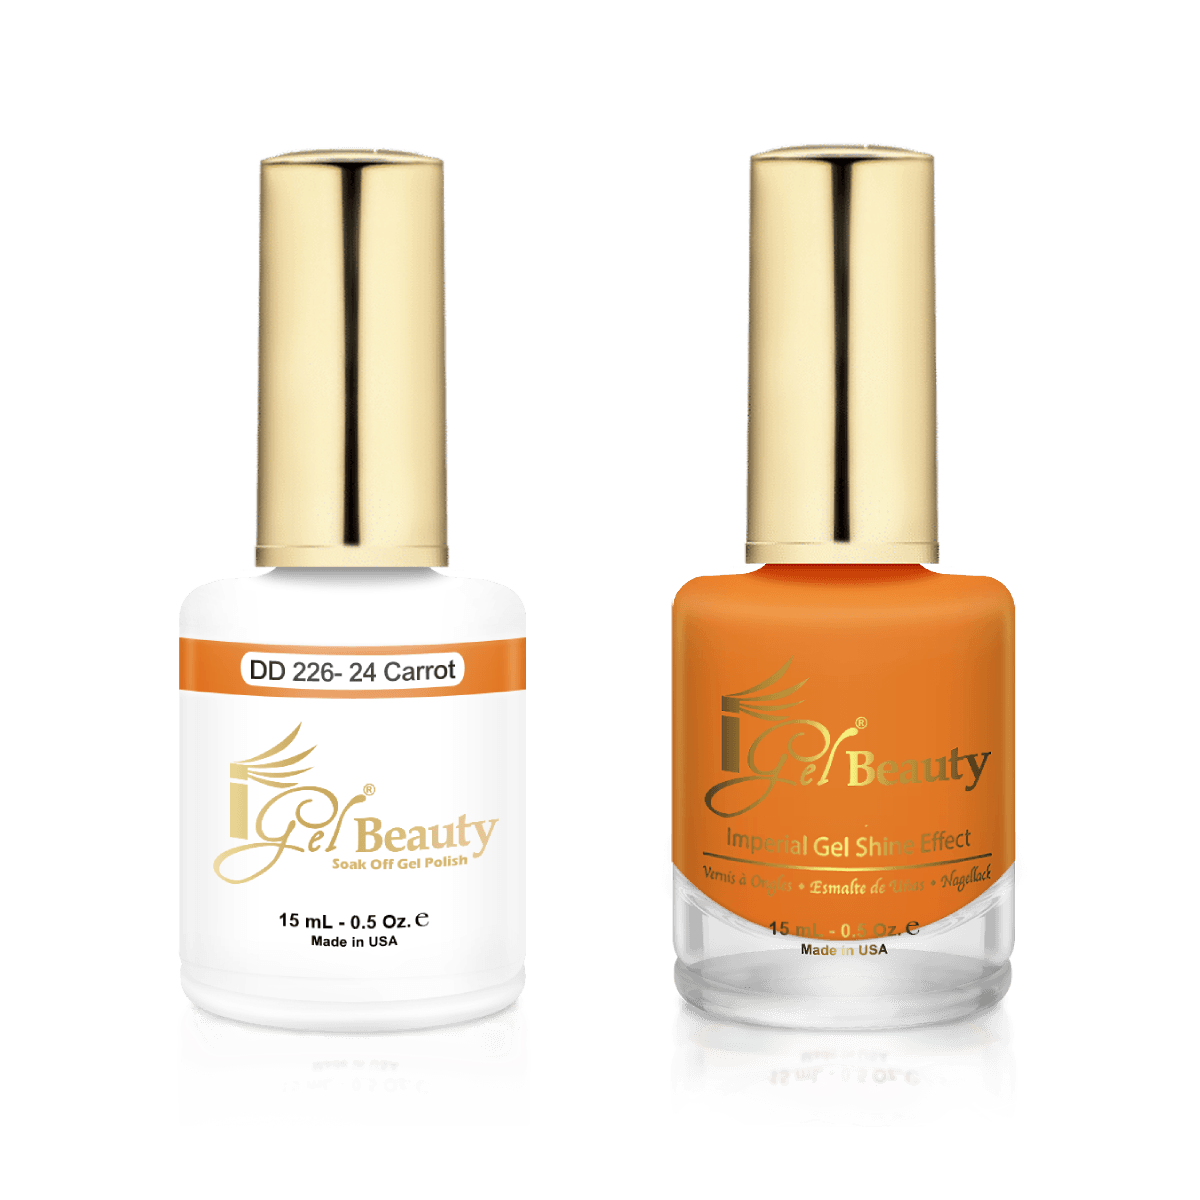 IGel Duo Gel Polish + Matching Nail Lacquer DD 226 24 CARROT